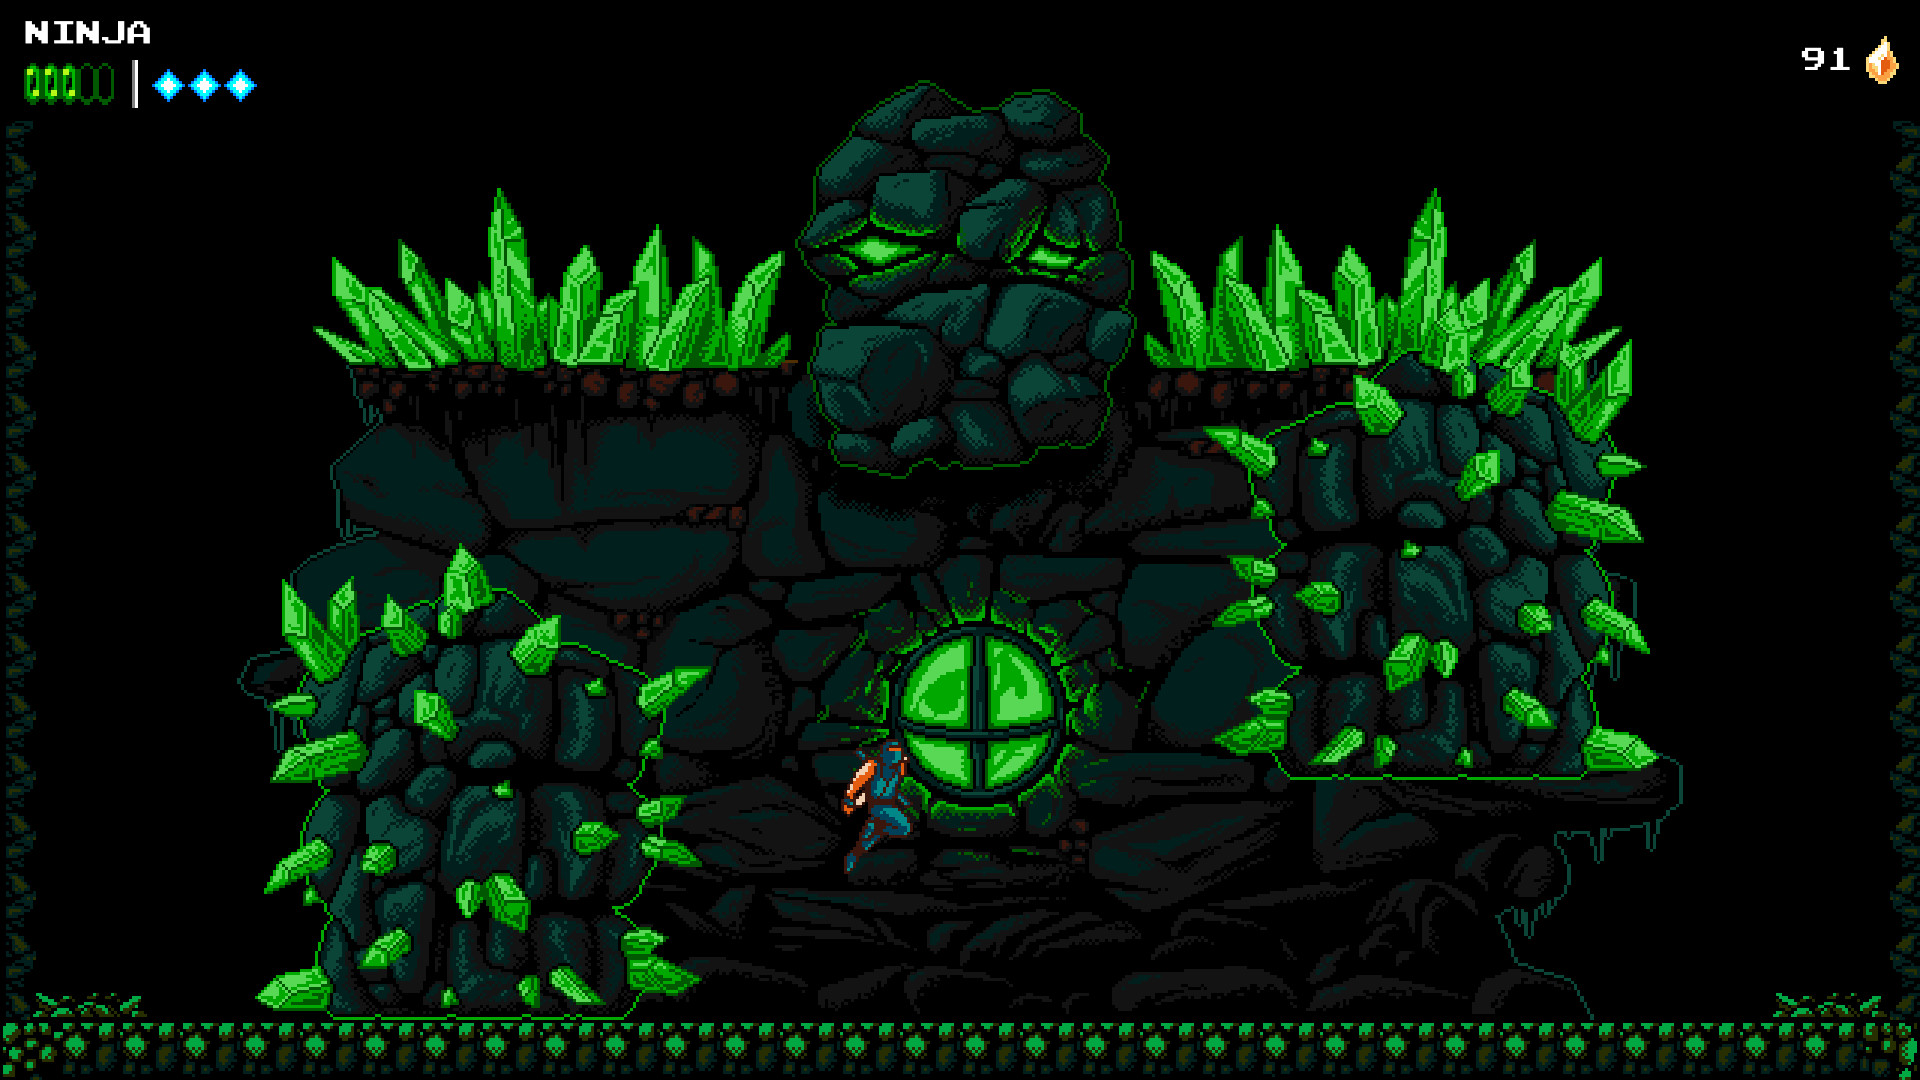 Best retro games: The Messenger. Image shows a large stone golem with crystals coming out of it.